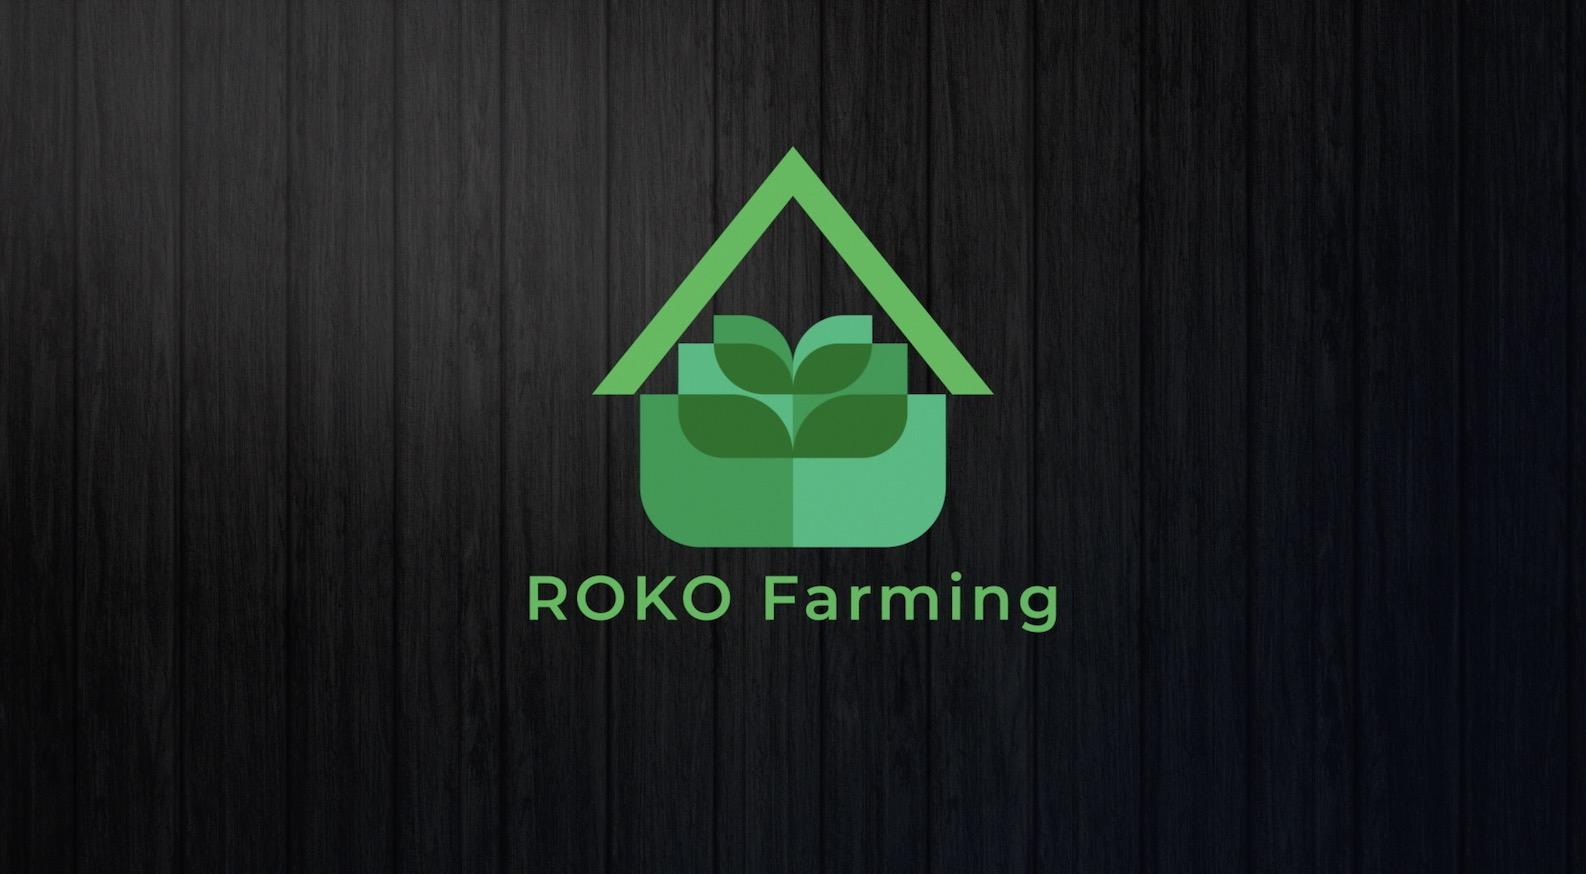 ROKO Farming / startup from Ulm / Background